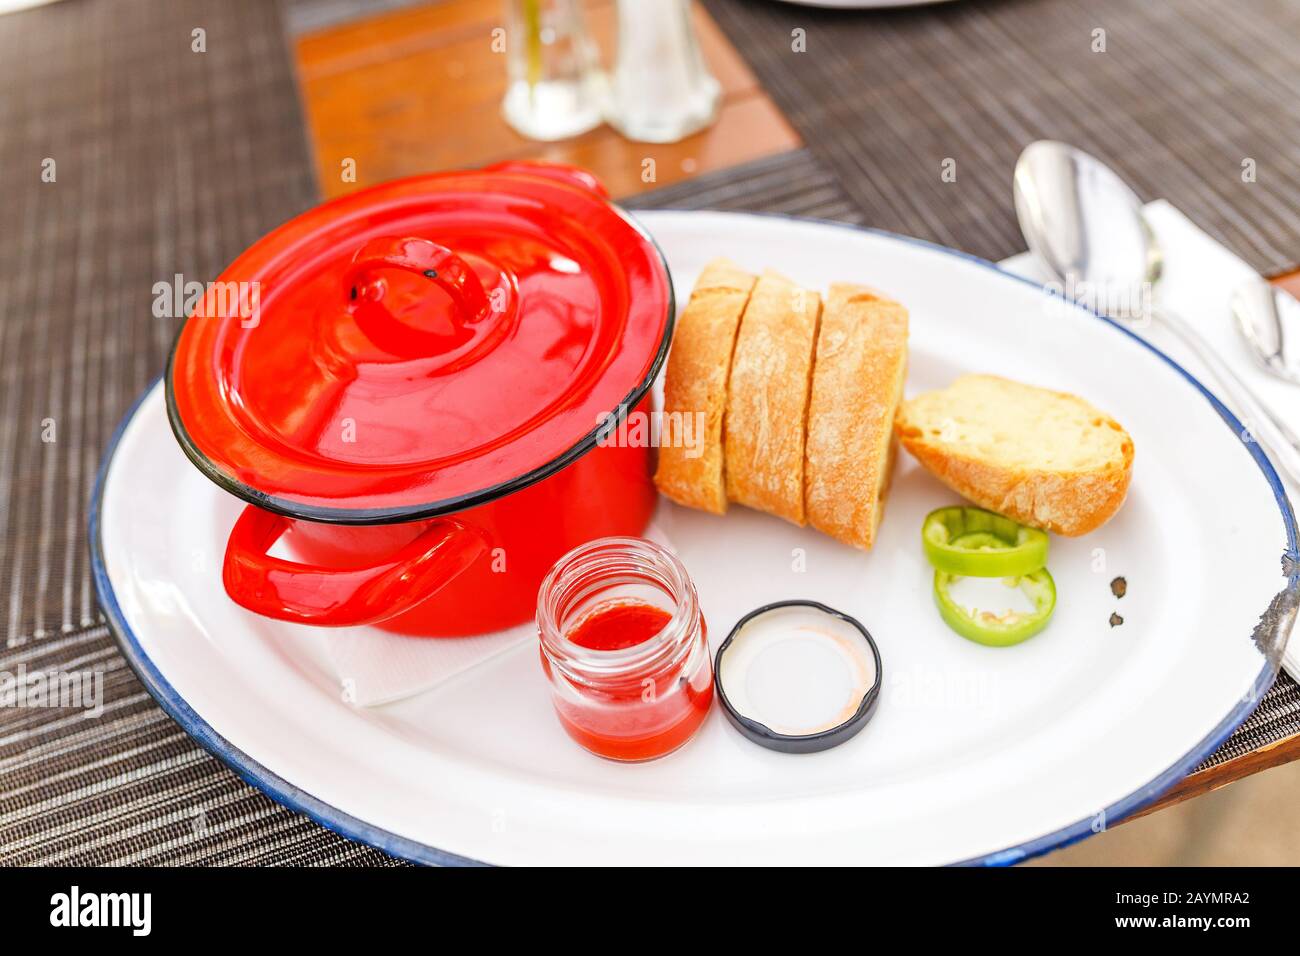 Tasty goulash soup in red pot casserole on a restaurant table Stock Photo